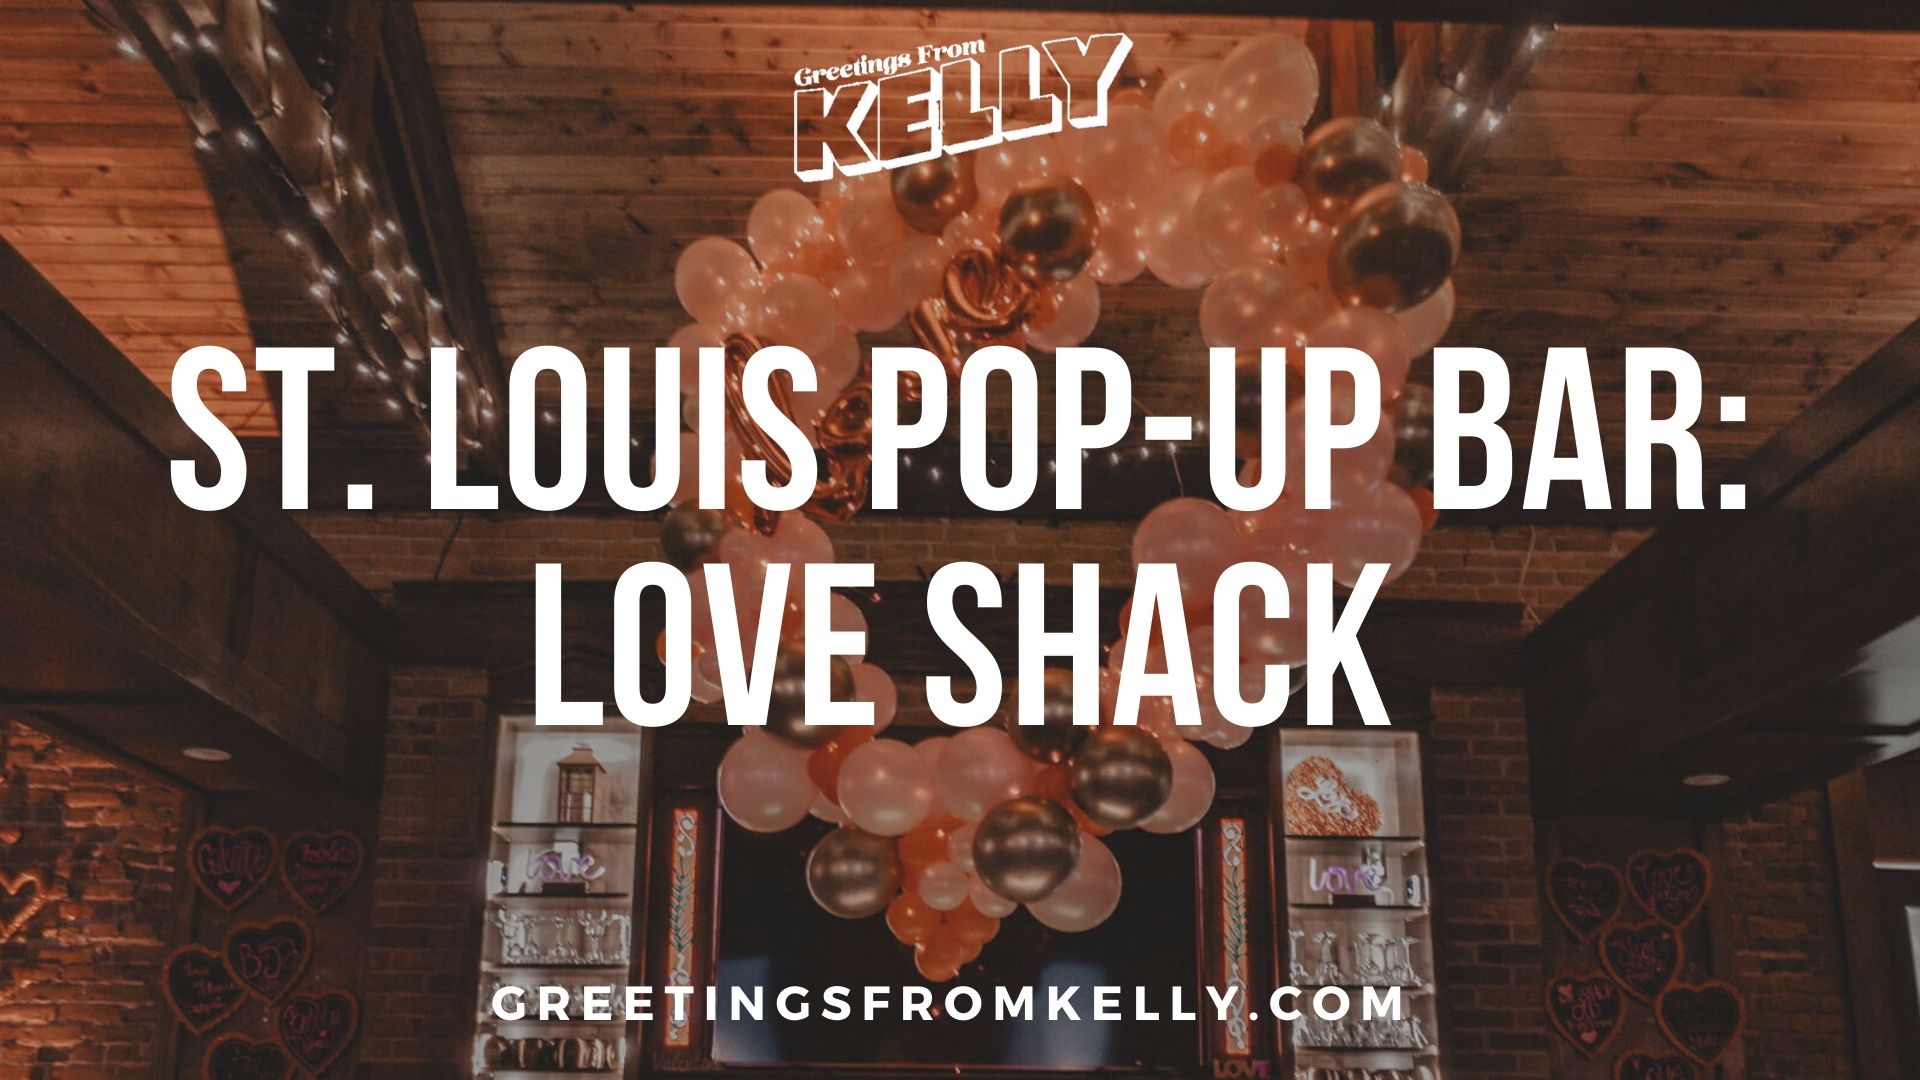 St Louis Valentine’s Day PopUp Bar Love Shack Greetings From Kelly